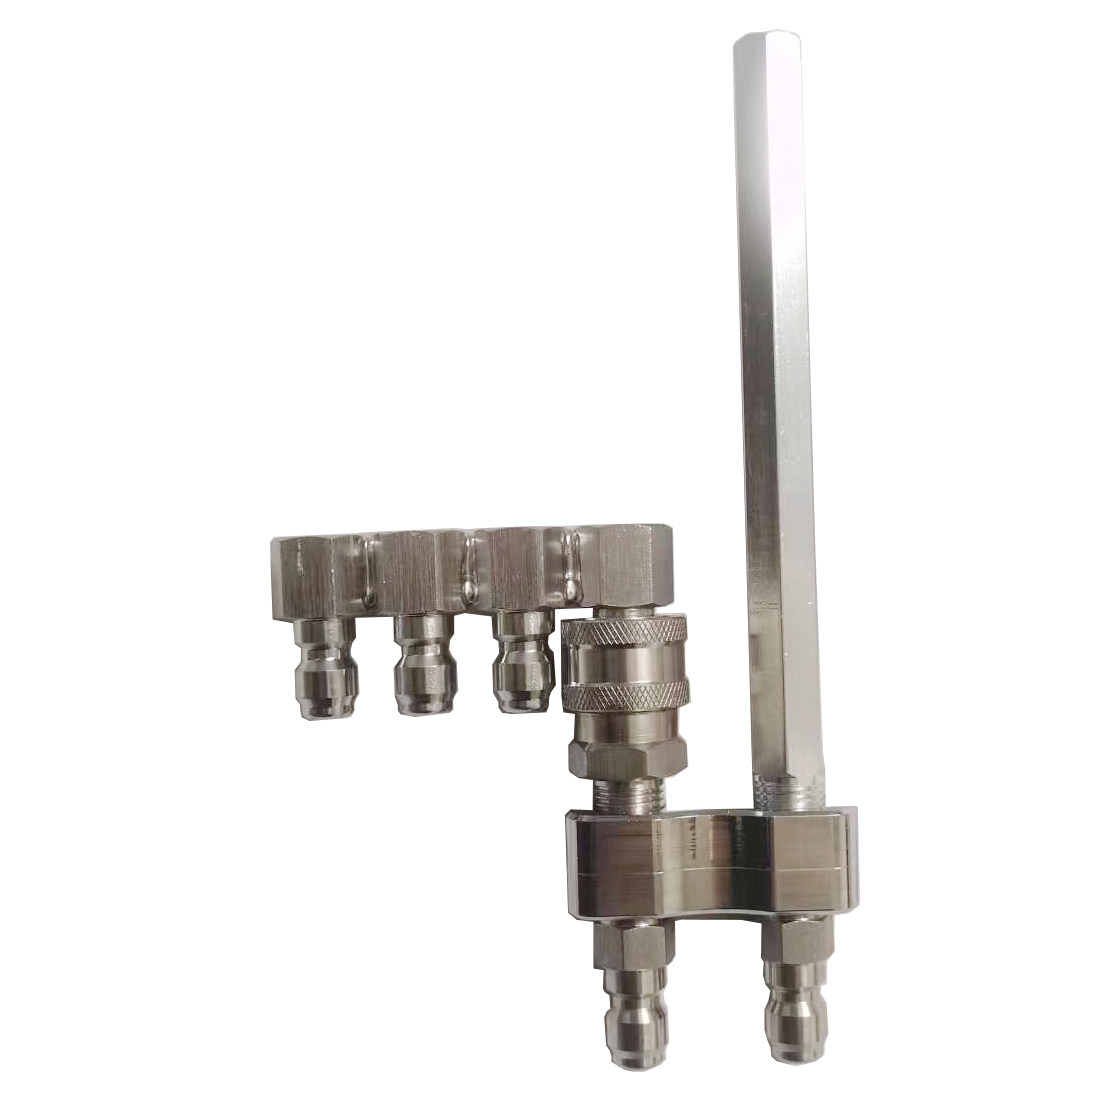 2-Way Holder J-Rod with Long Range Nozzle and 4nozzle Holder  2WH109-LRN400-4NH101